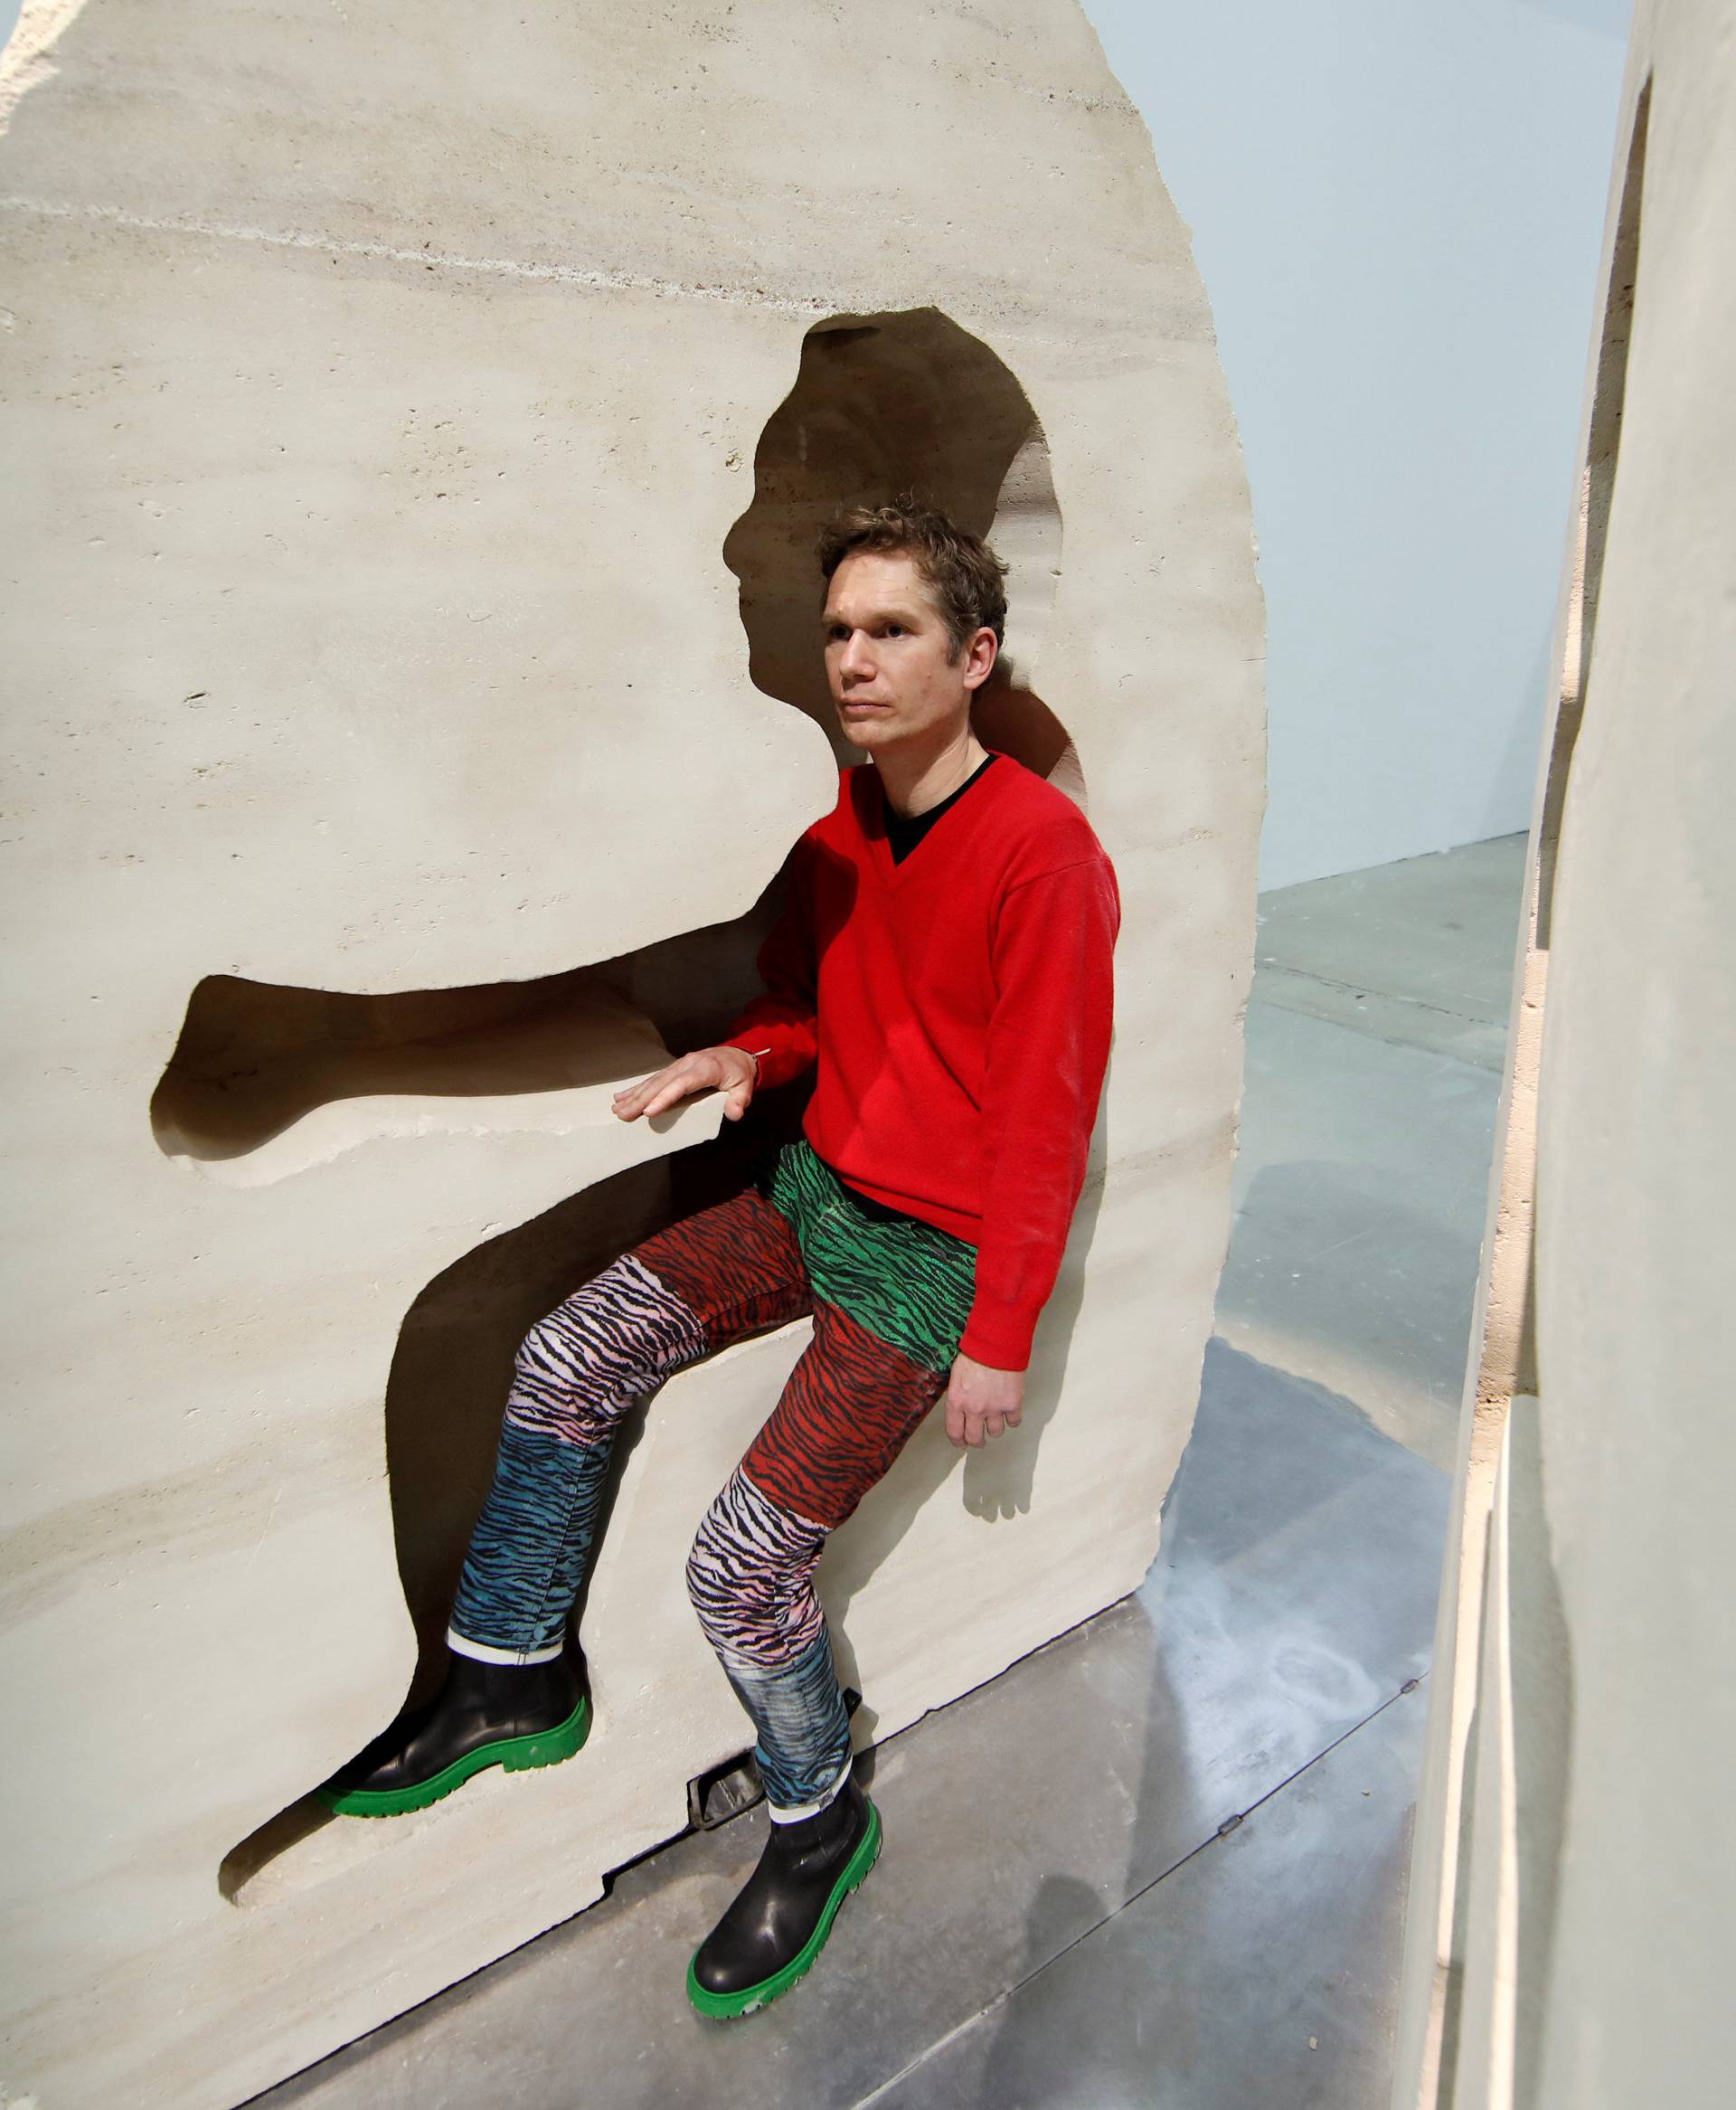 French artist Abraham Poincheval poses inside his artwork Pierre ("Stone") in Paris